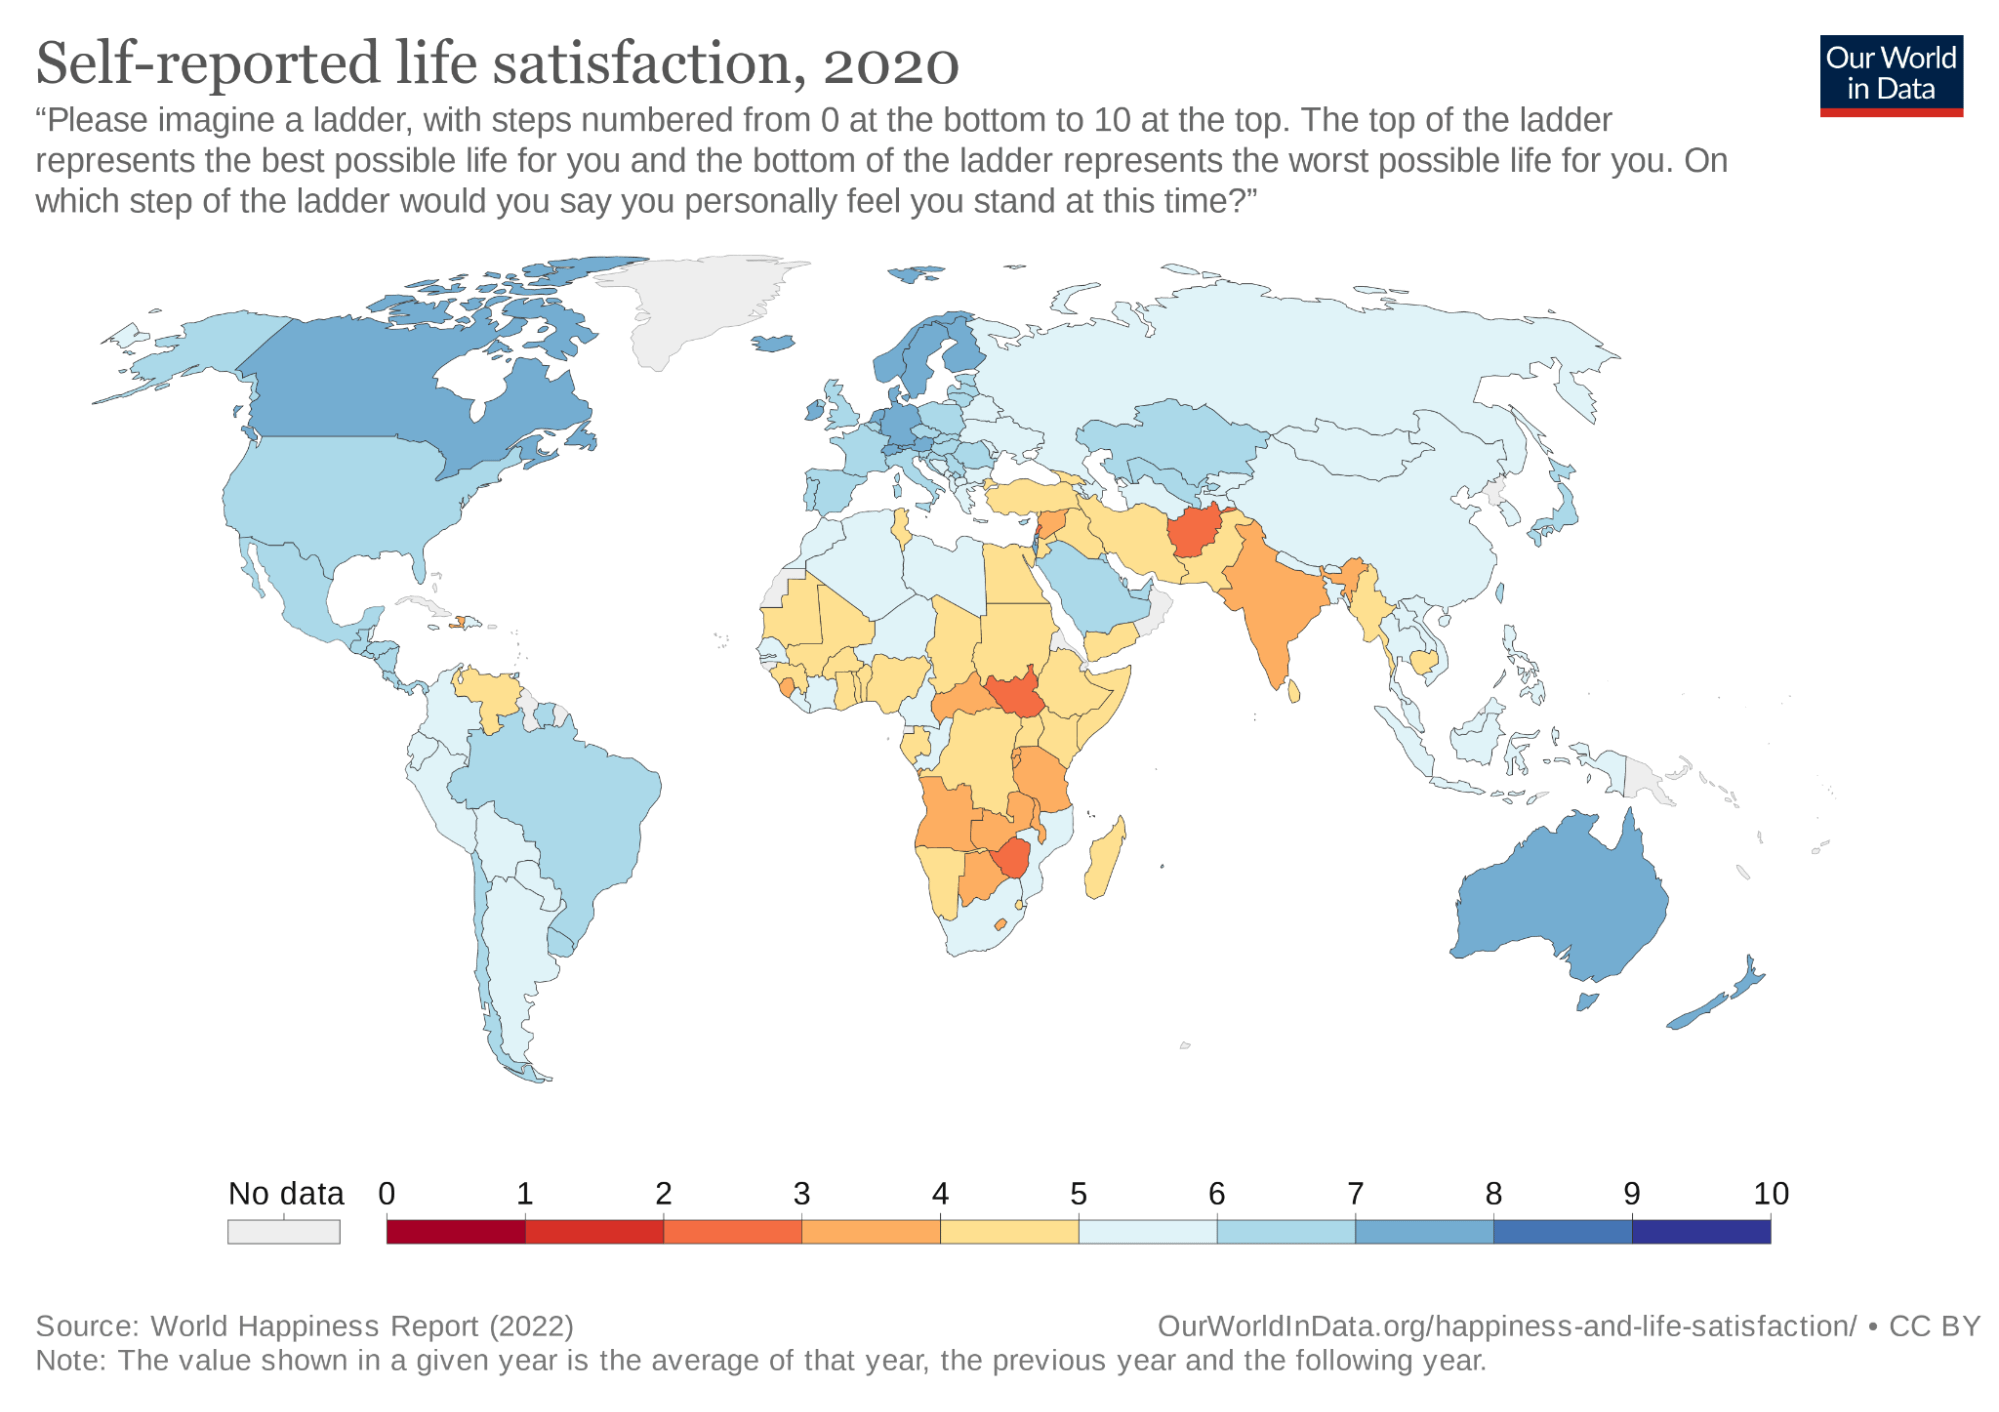 Self-reported life satisfaction, 2020 (Our World in Data)